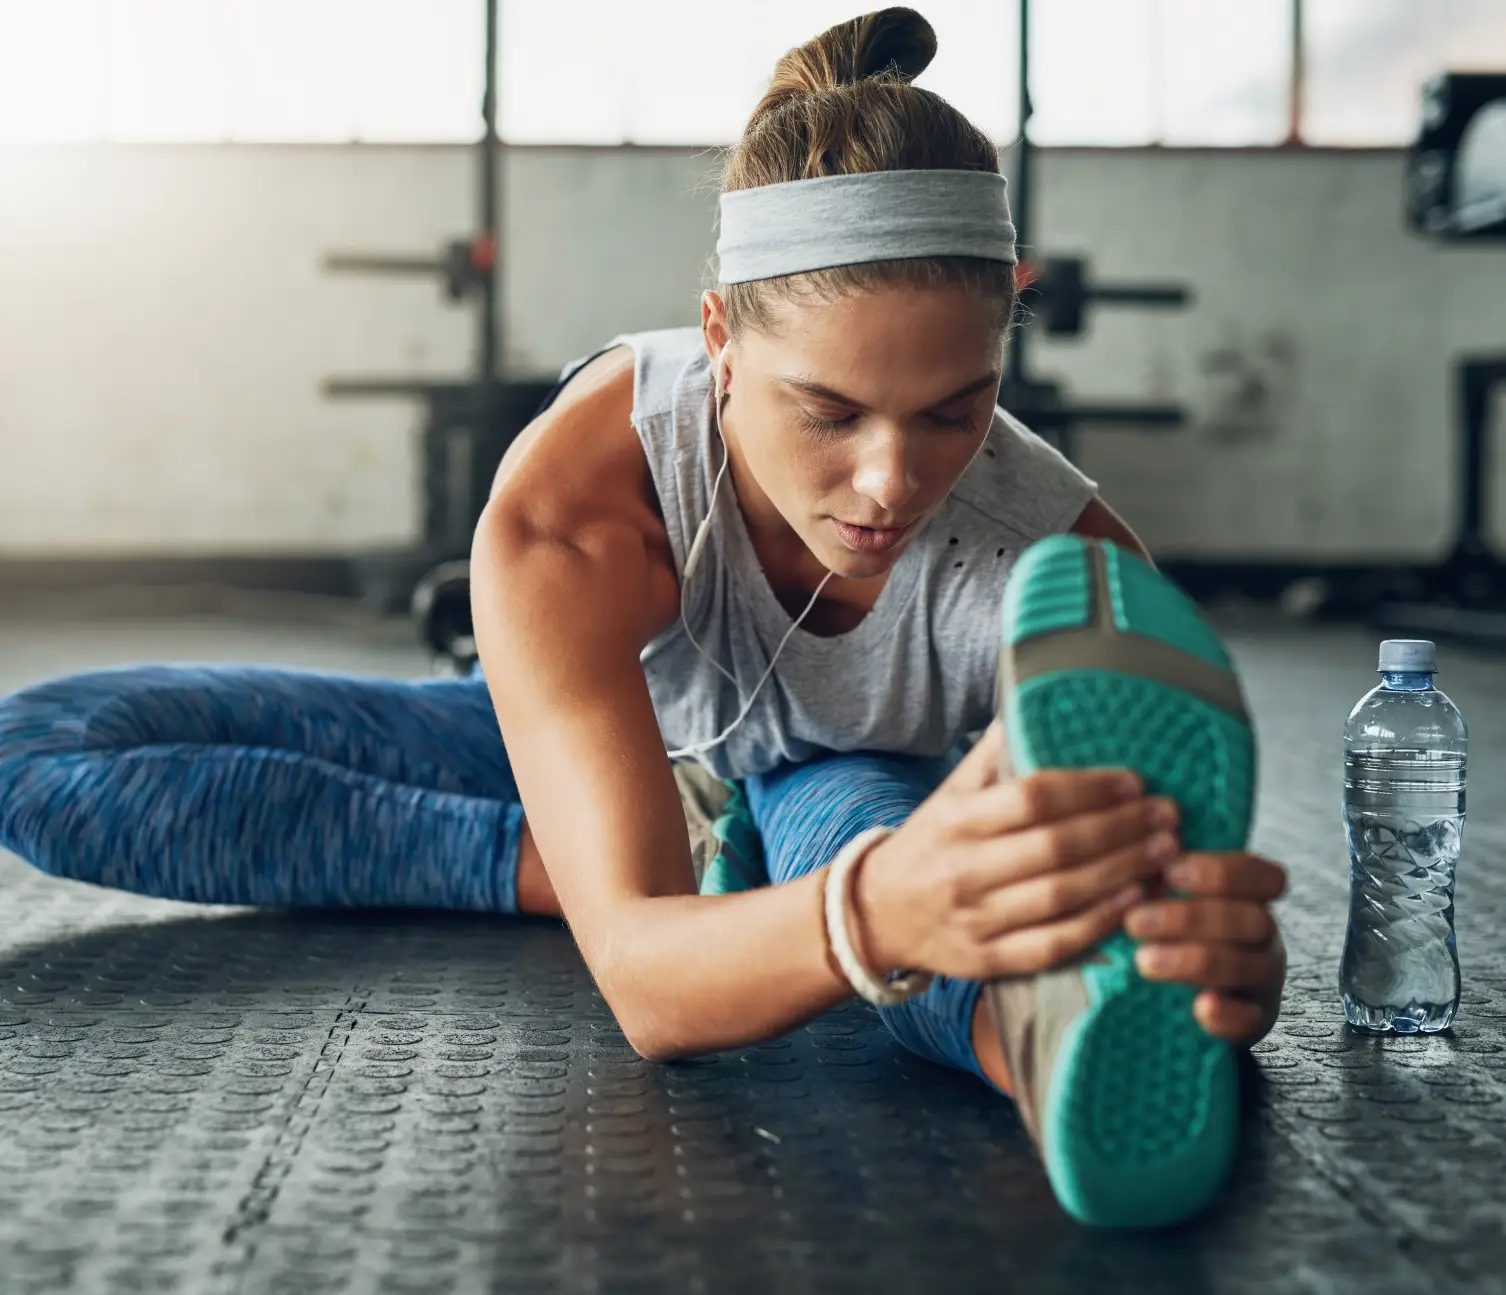 4 Quick Tips for Active Recovery After a CrossFit Workout